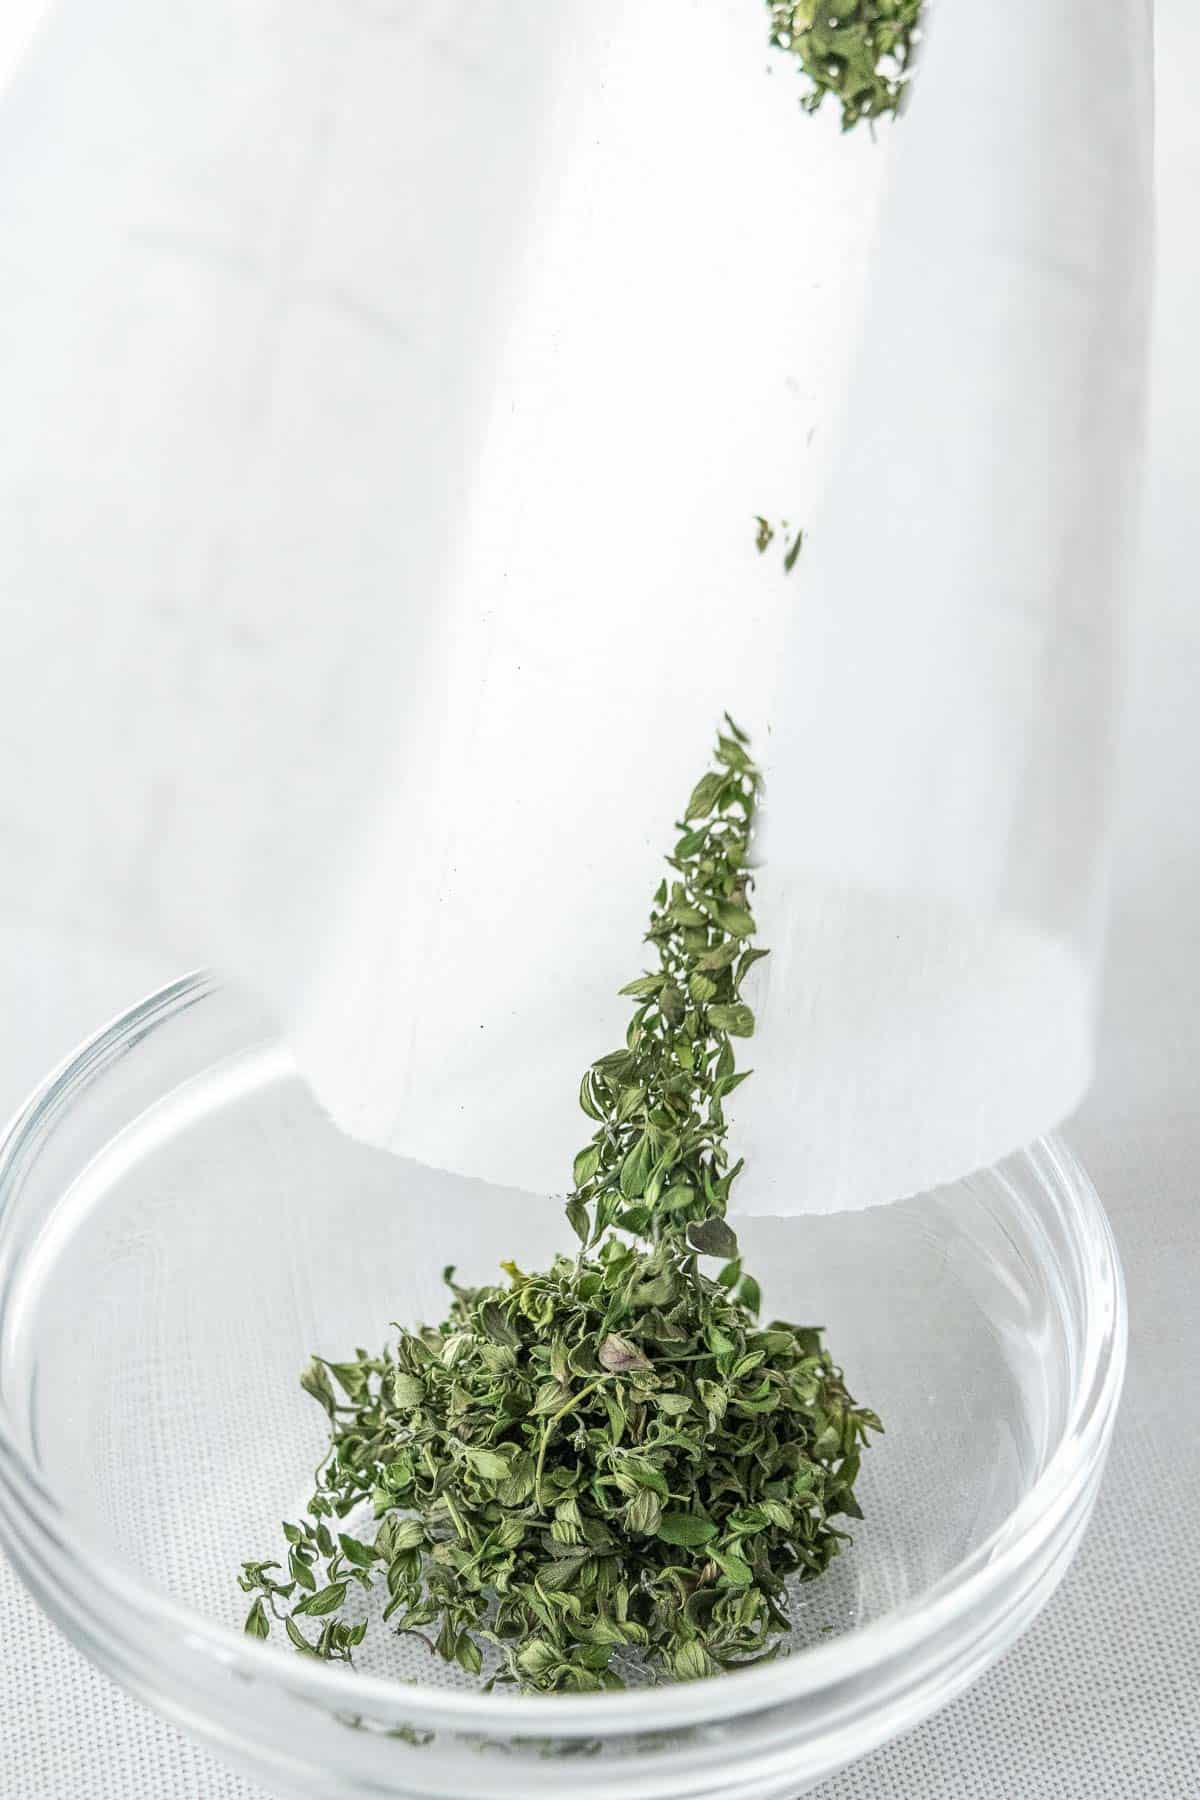 Pouring dried thyme into glass bowl.